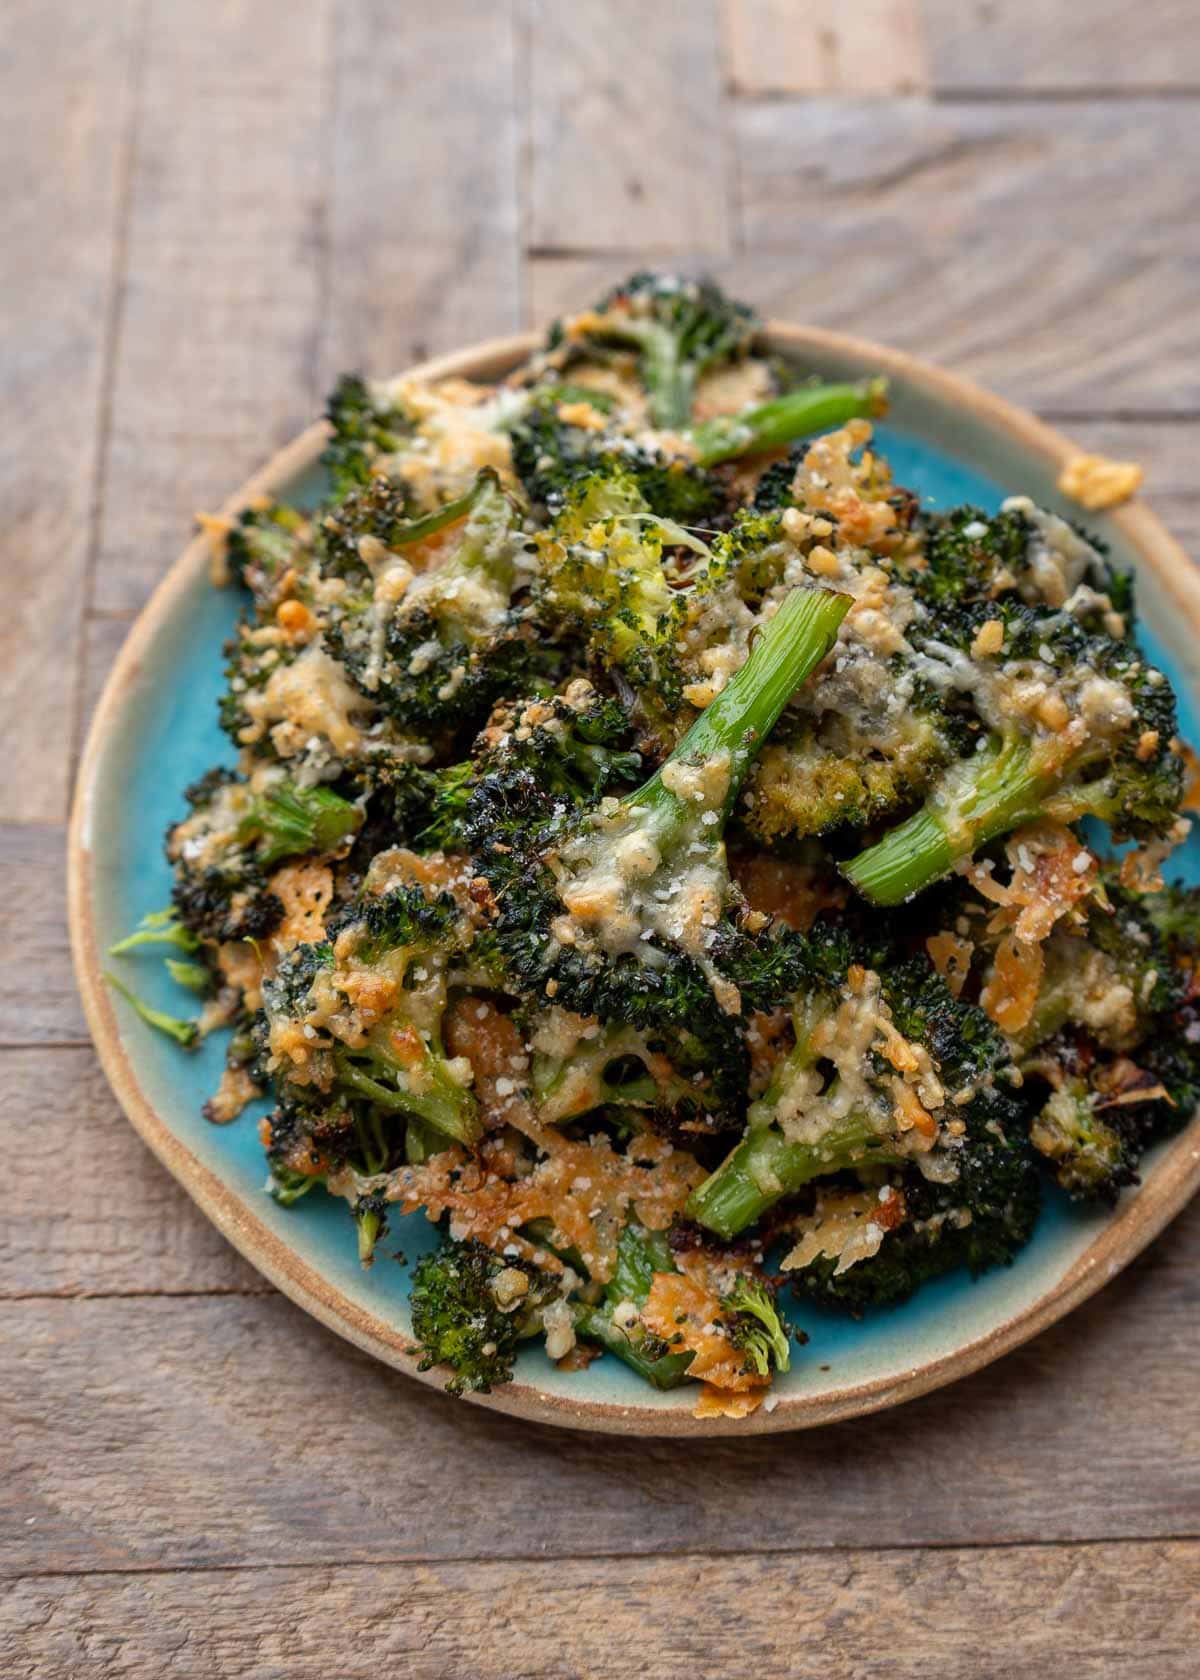 far-away shot of plate full of smashed broccoli